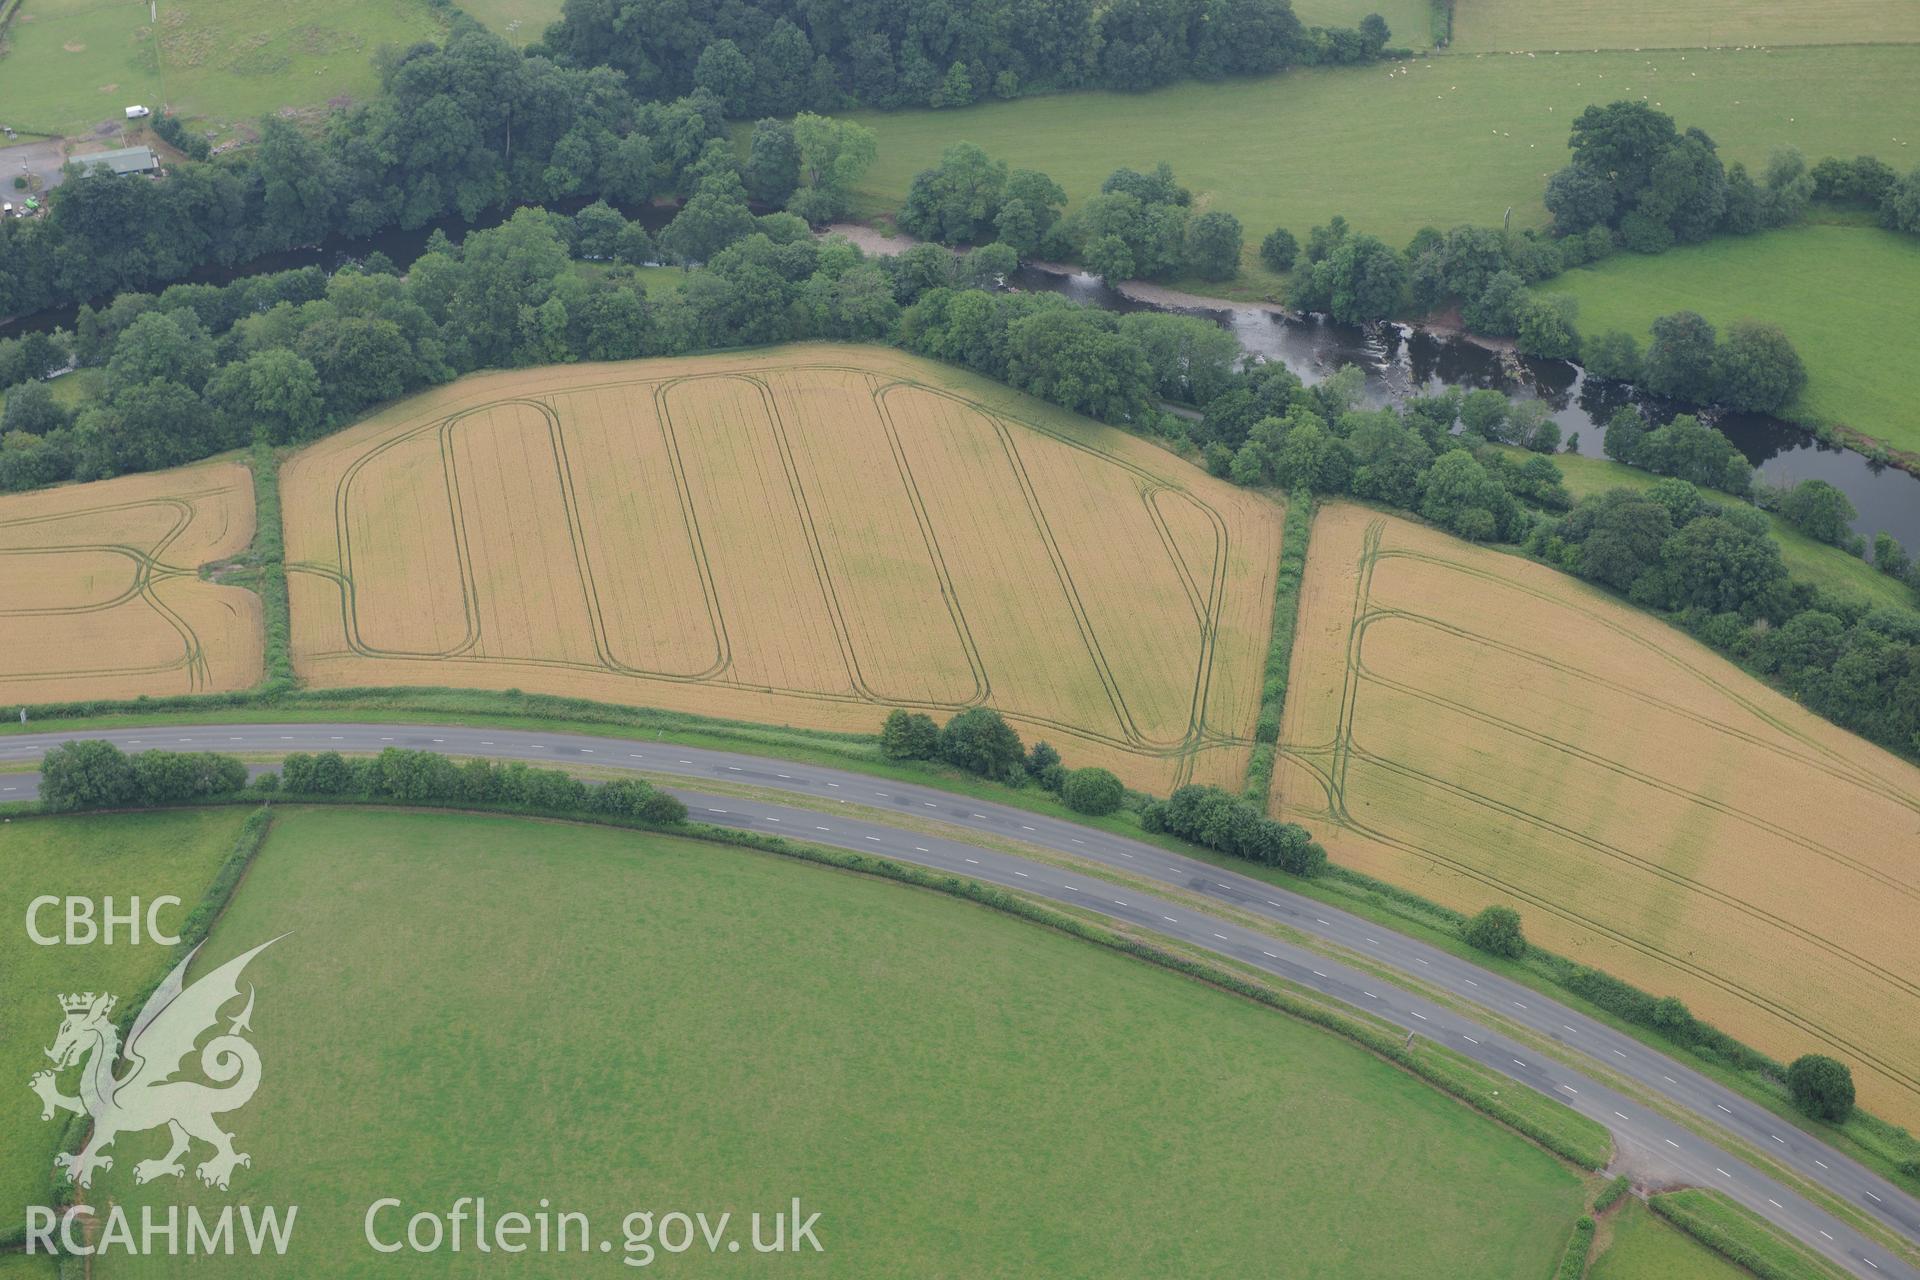 Cefn-brynich Roman fort, general view of cropmarks from north, taken by RCAHMW 1st August 2013.